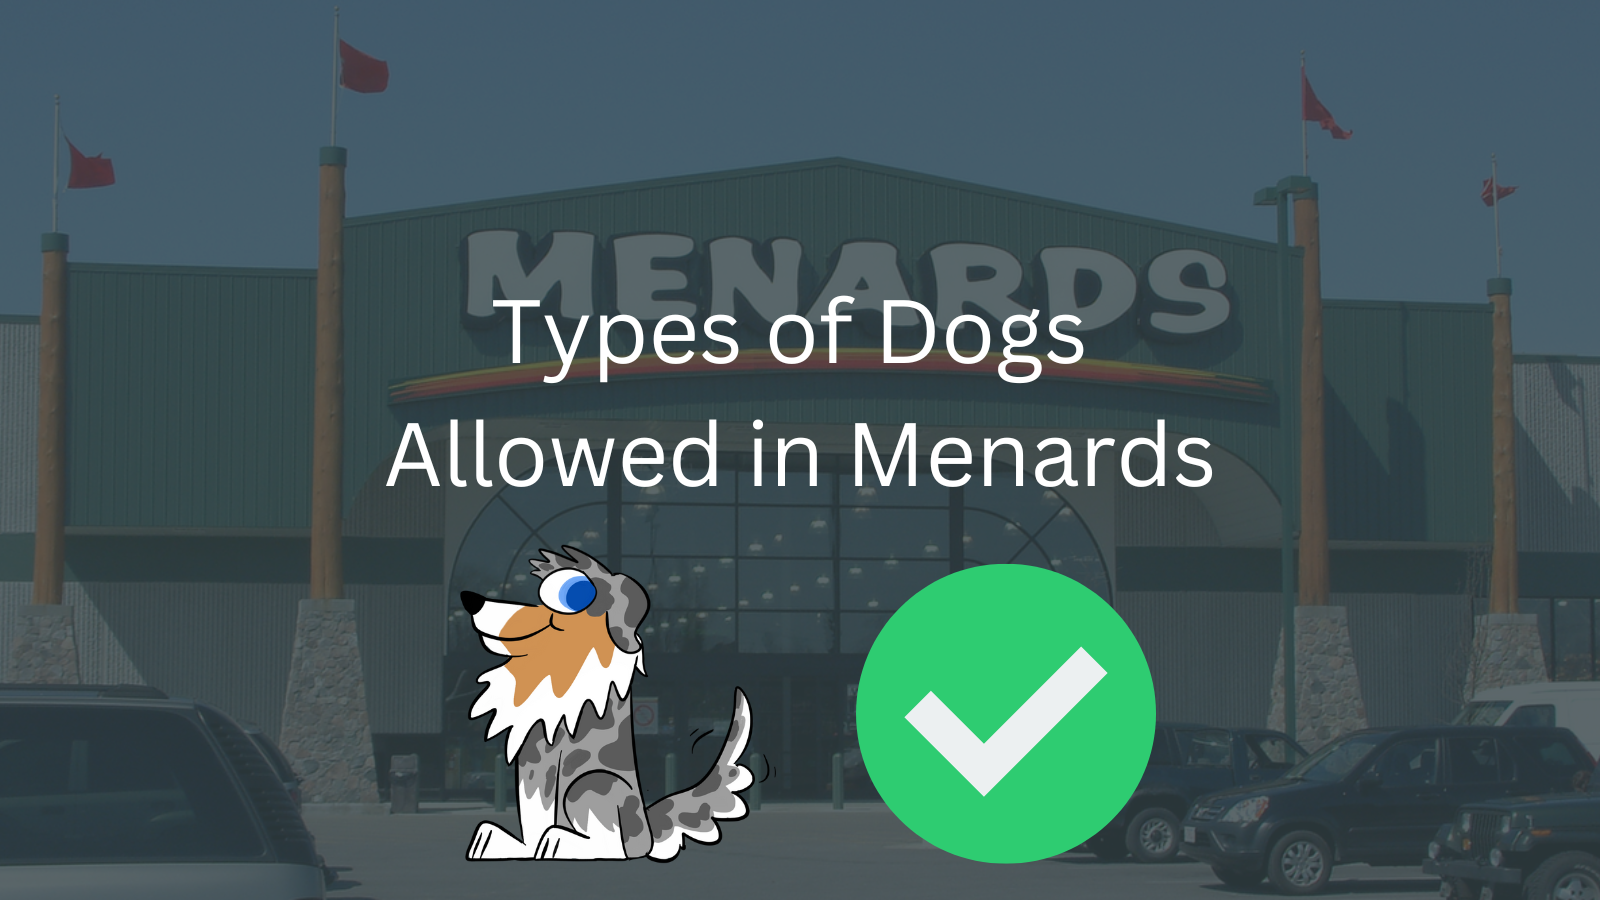 Image Text: "Types of Dogs Allowed in Menards"